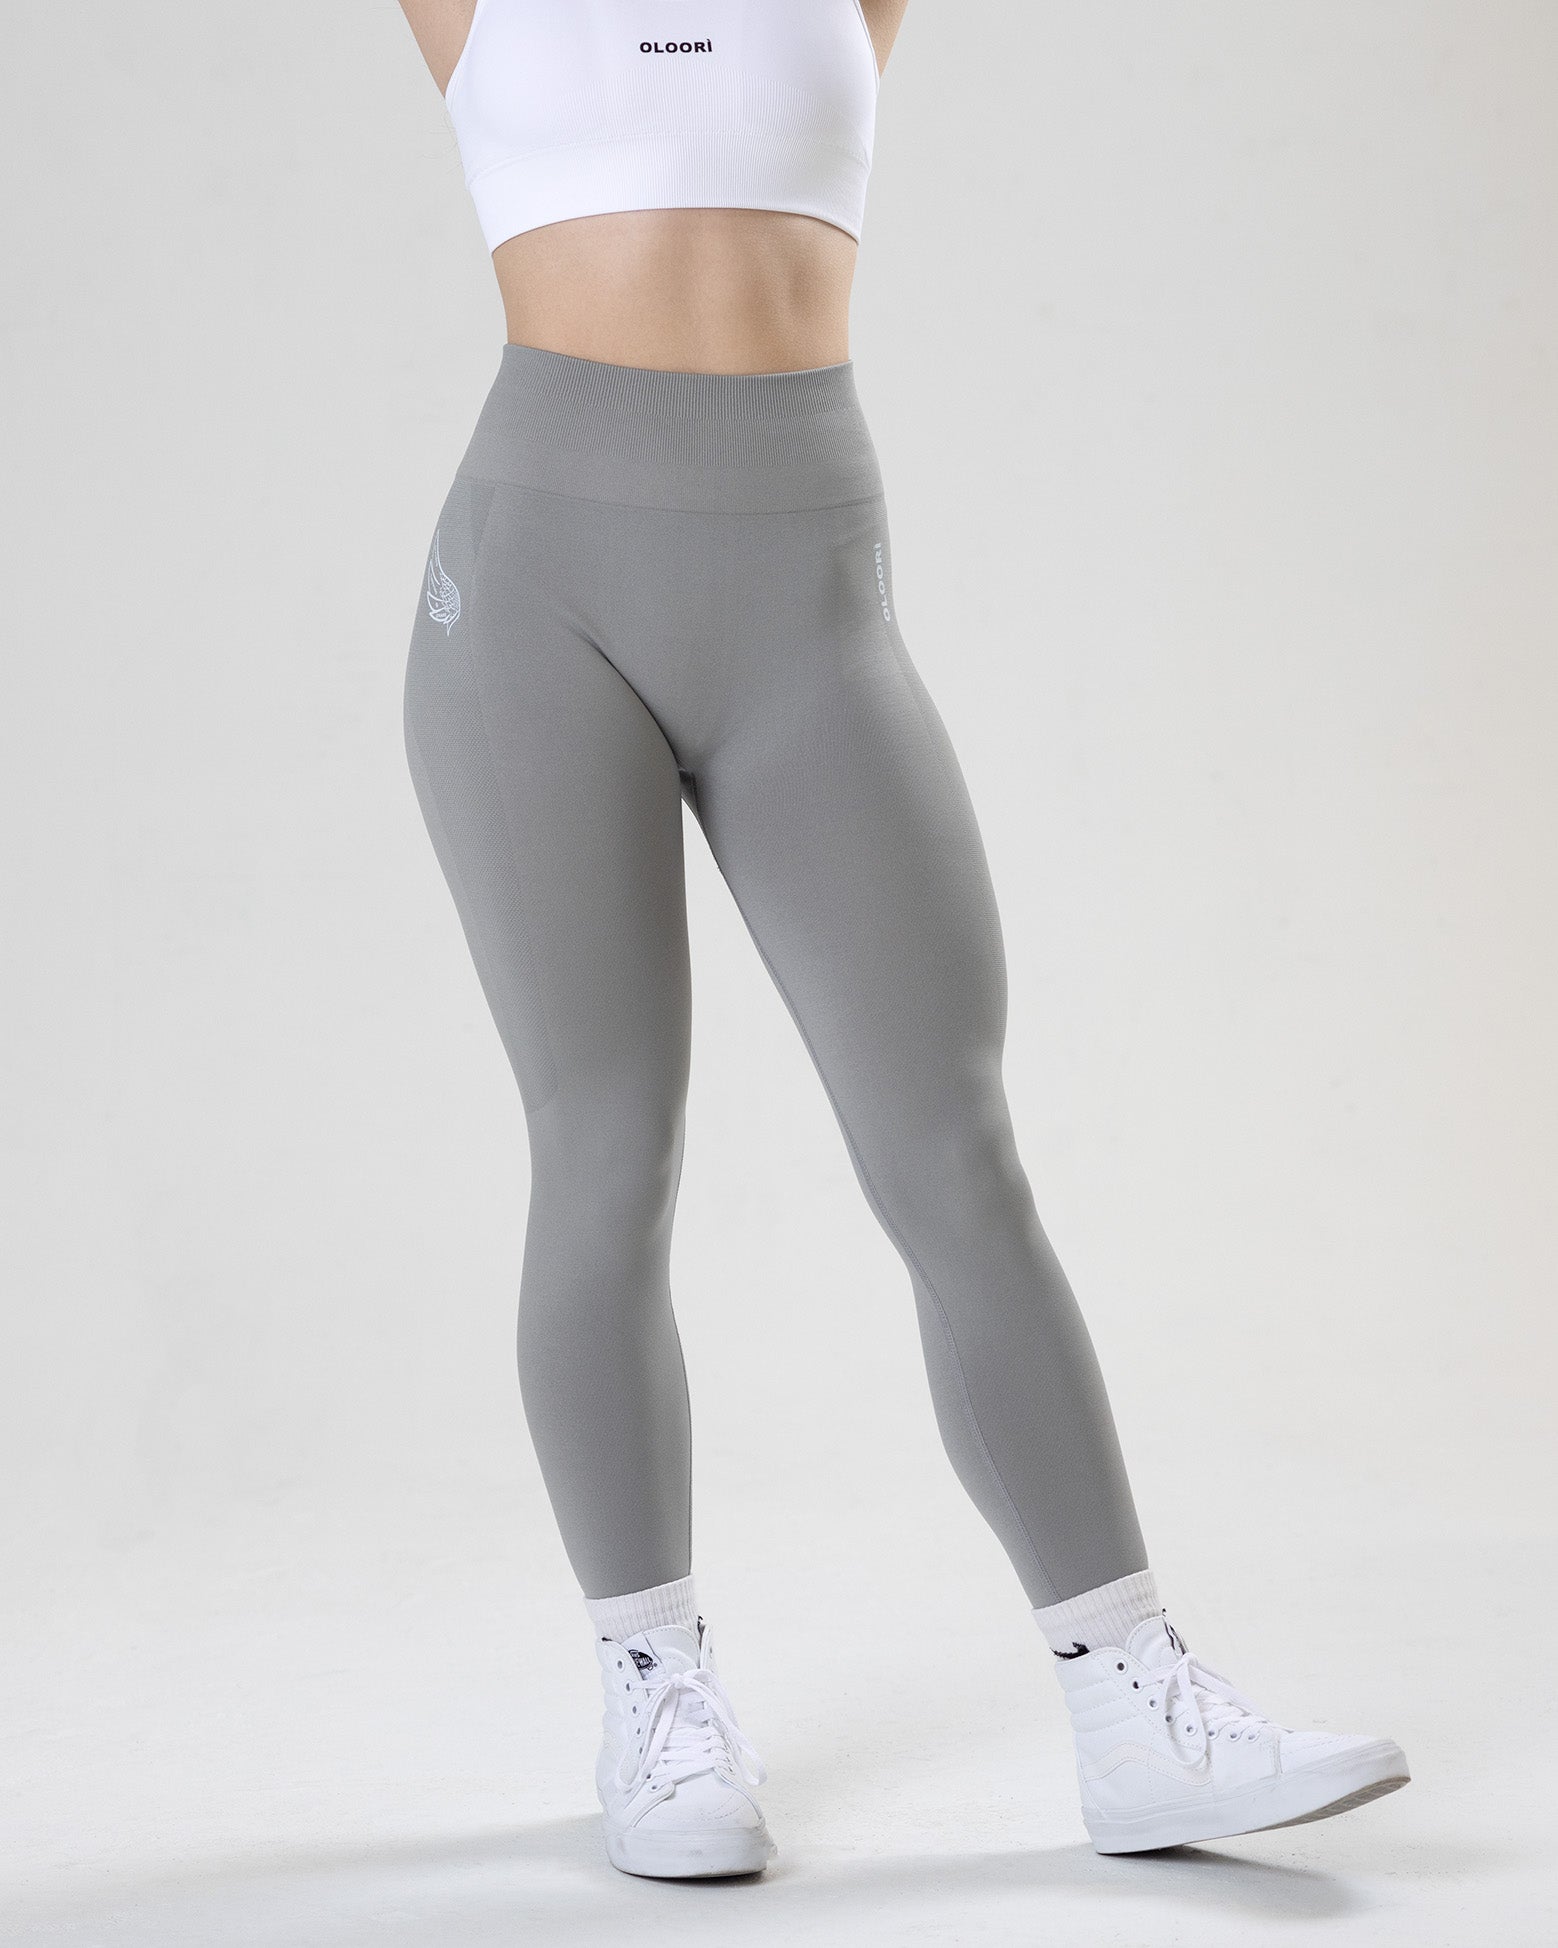 Crushing It: Seamless Workout Legging Outfit in Grey - ShopperBoard